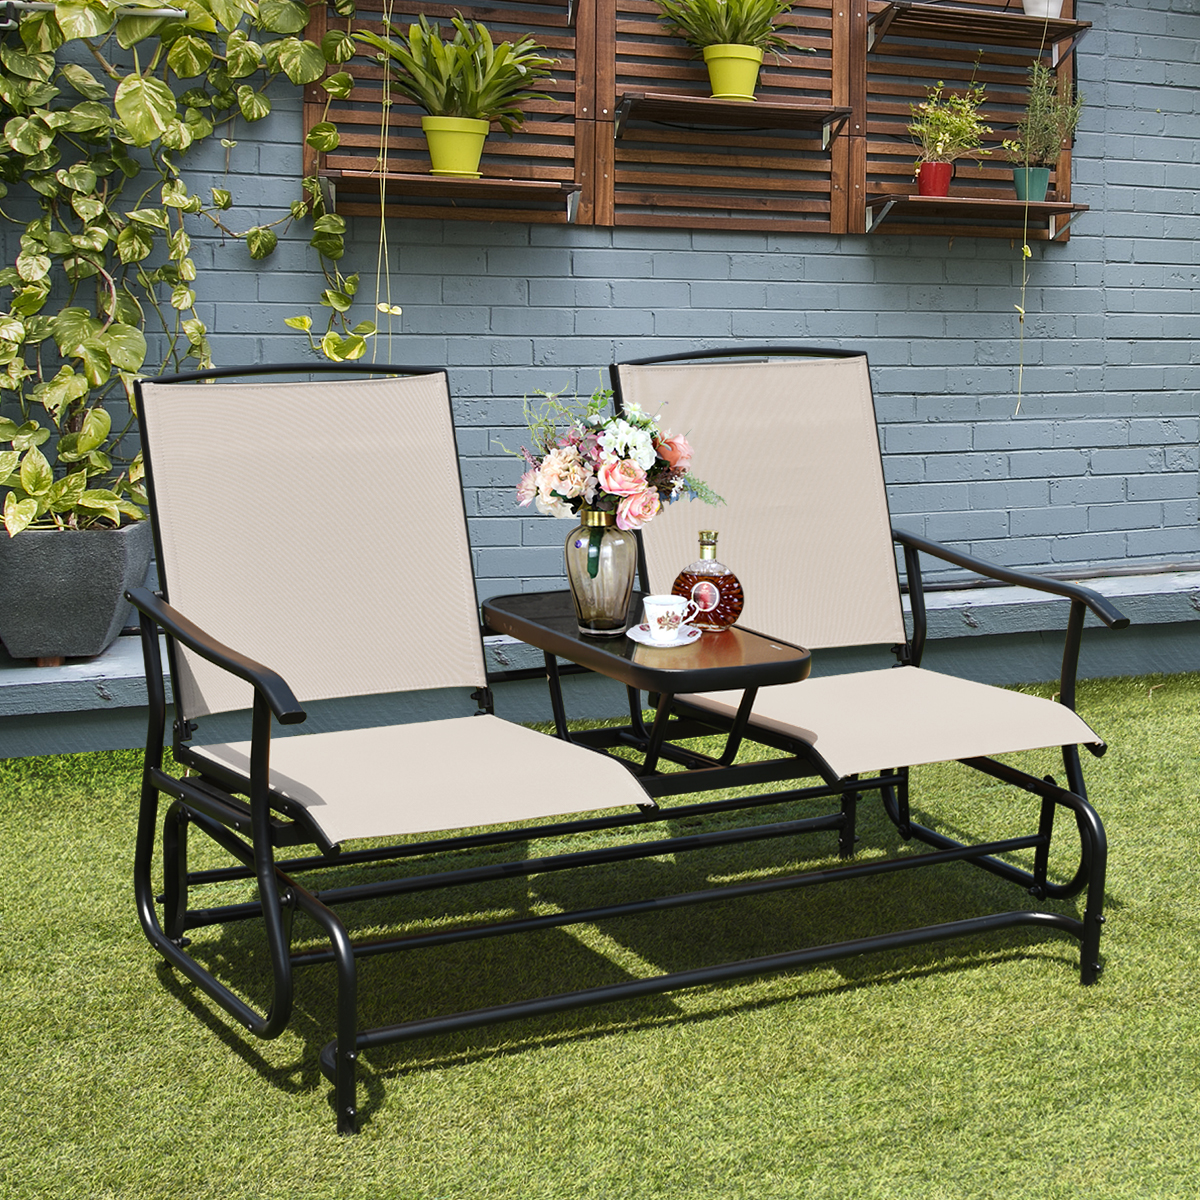 Costway 2 Person Patio Double Glider Steel Frame Loveseat Rocking with Center Table - image 5 of 9